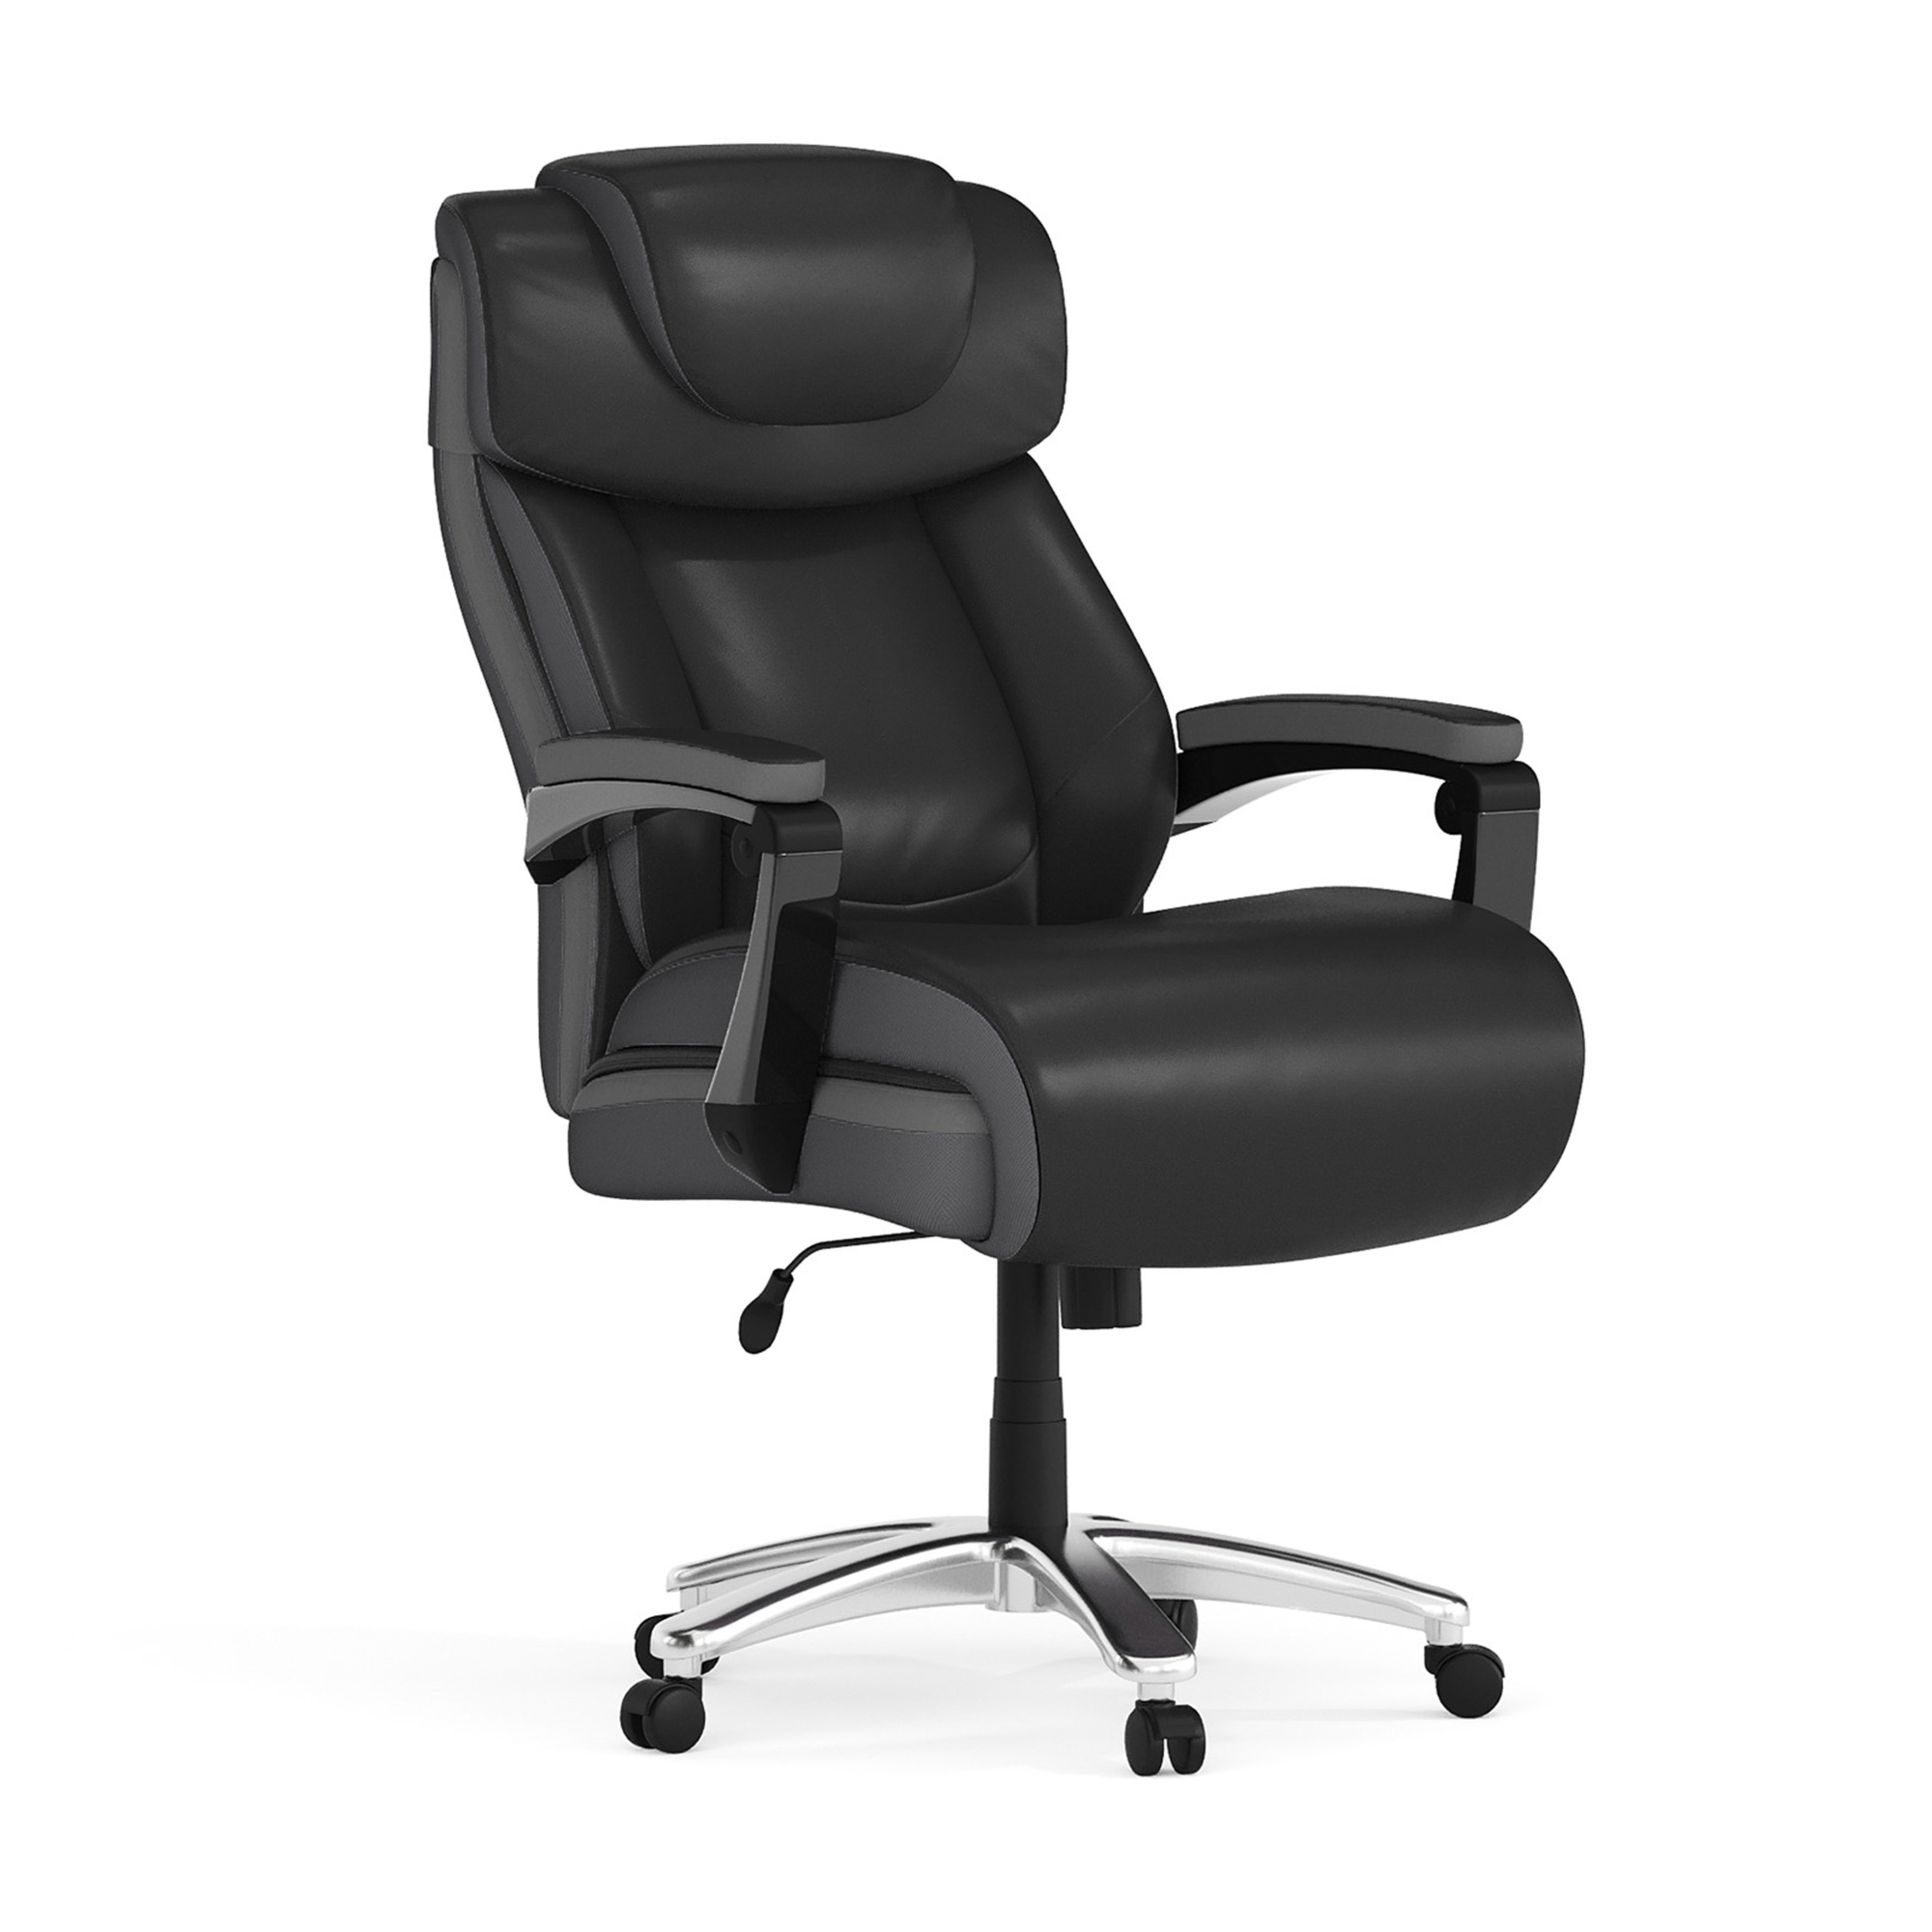 Flash Furniture, 500 lb. Rated Black LeatherSoft Ergonomic Chair, Primary Color Black, Included (qty.) 1, Model GO2223BK